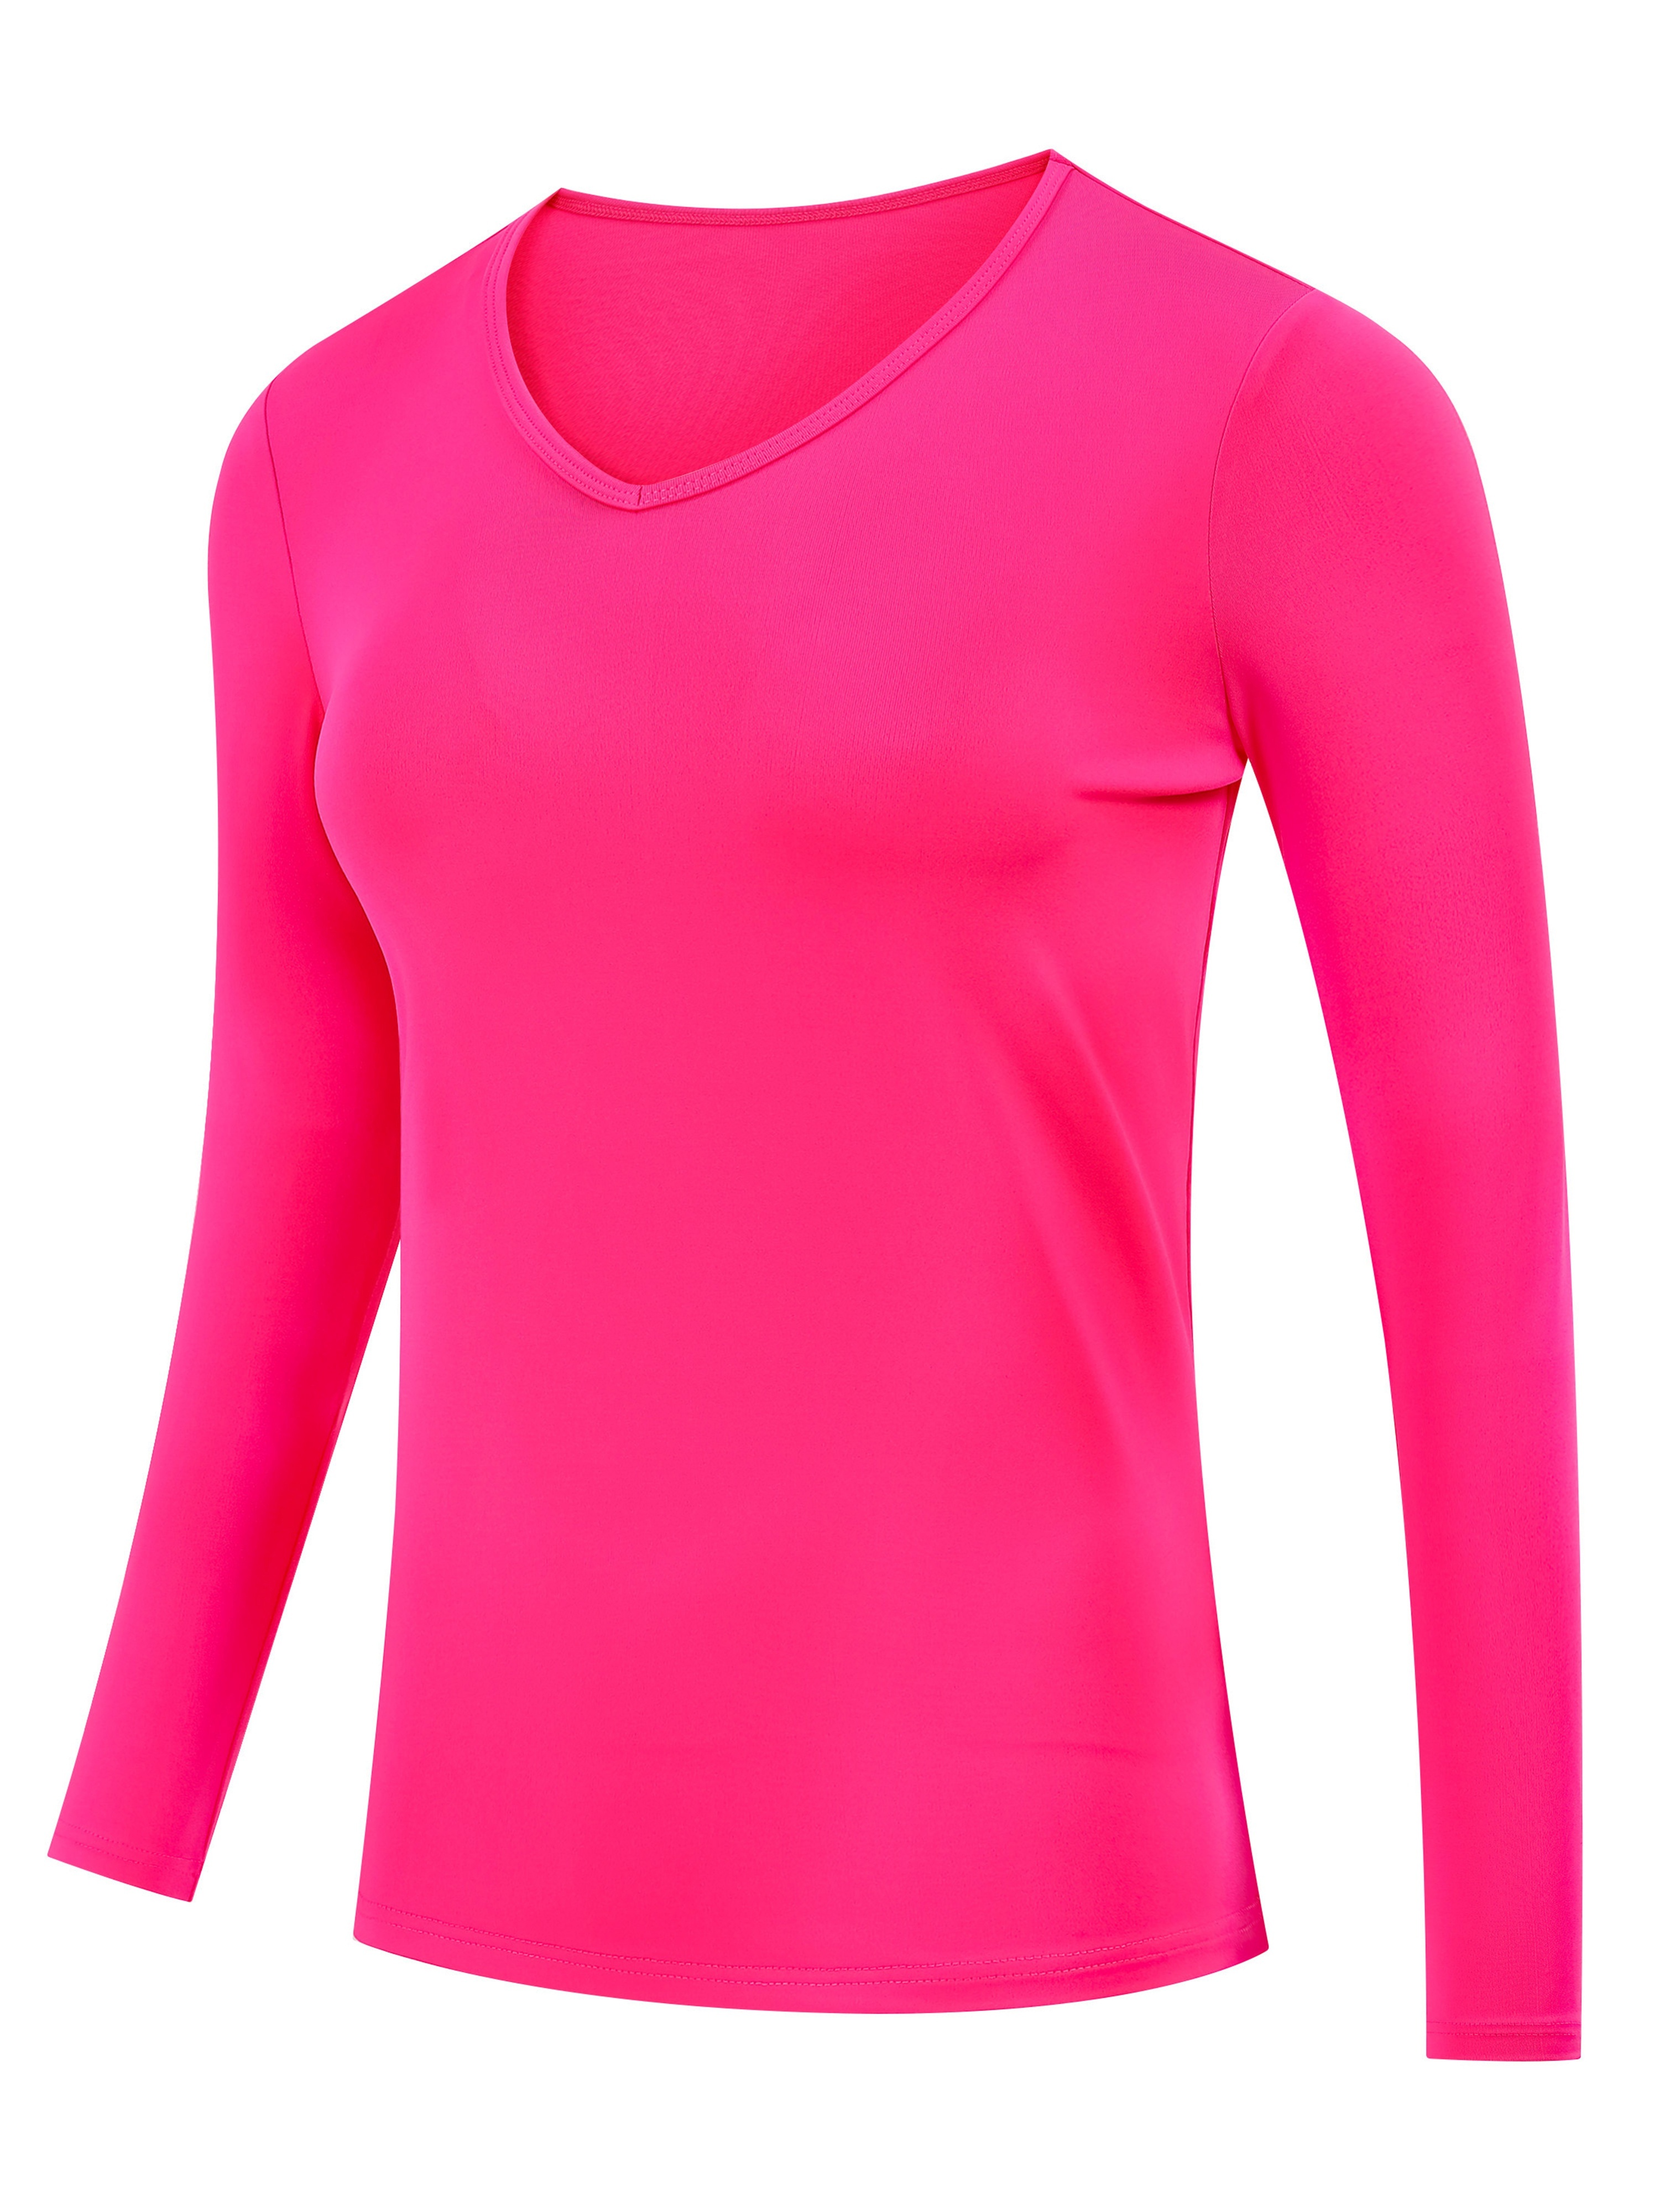 icyZone Workout Shirts Yoga Tops Activewear V-Neck T-shirts for